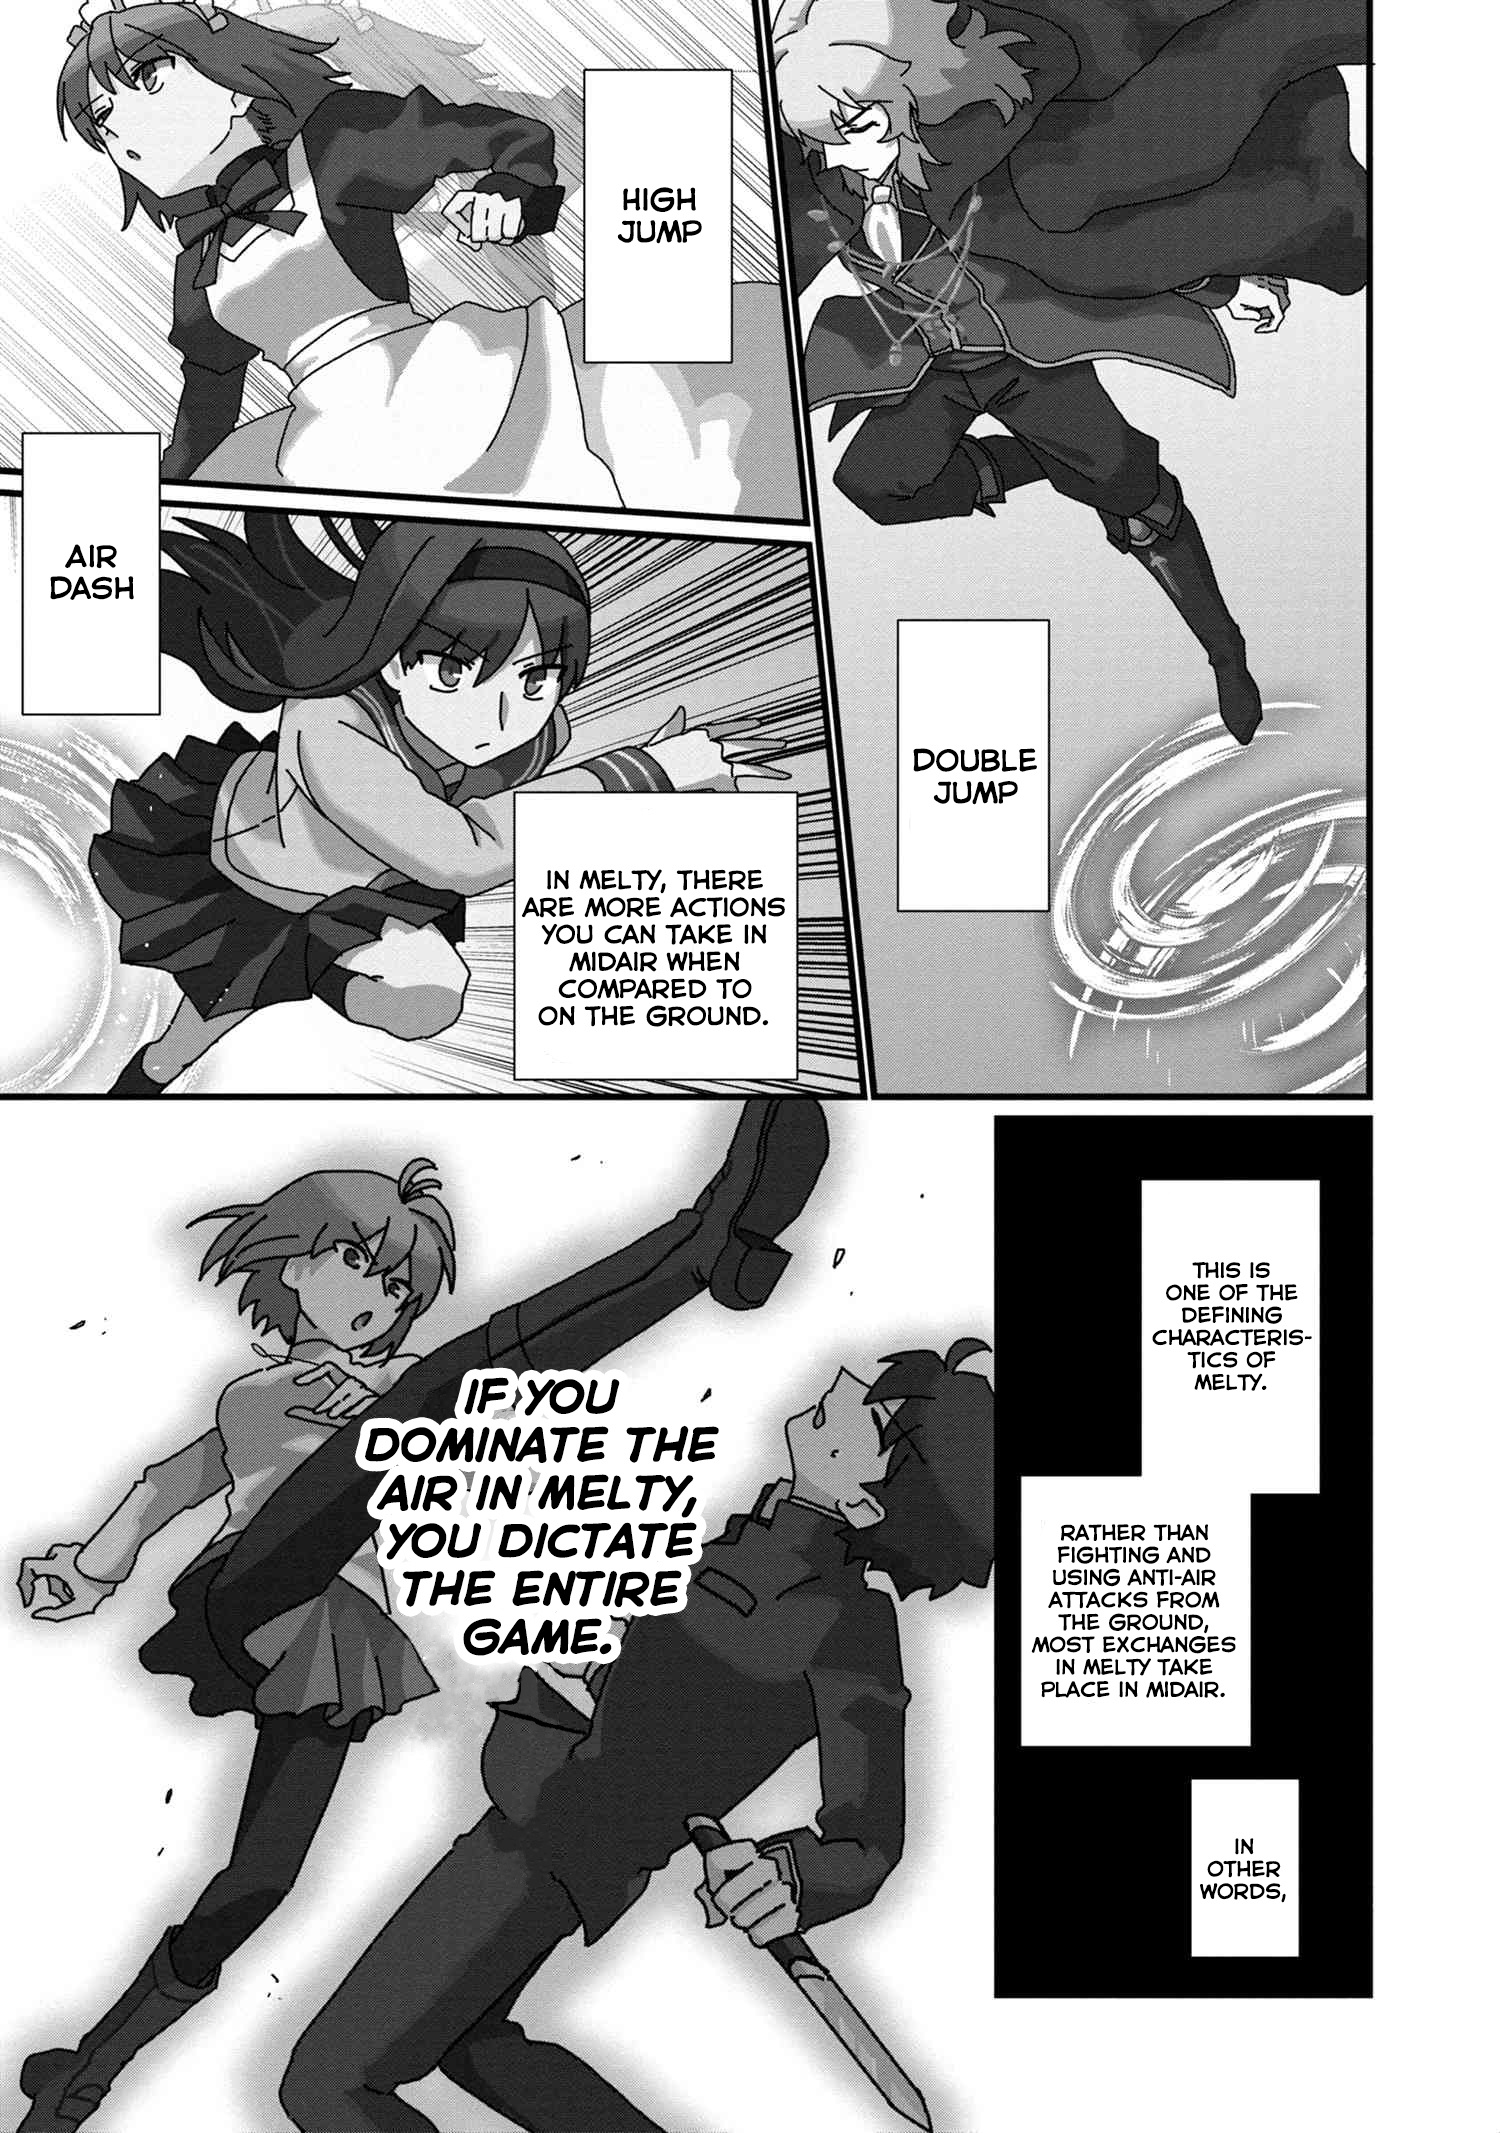 Melty Blood: Type Lumina Piece In Paradise - chapter 7.2 - #4